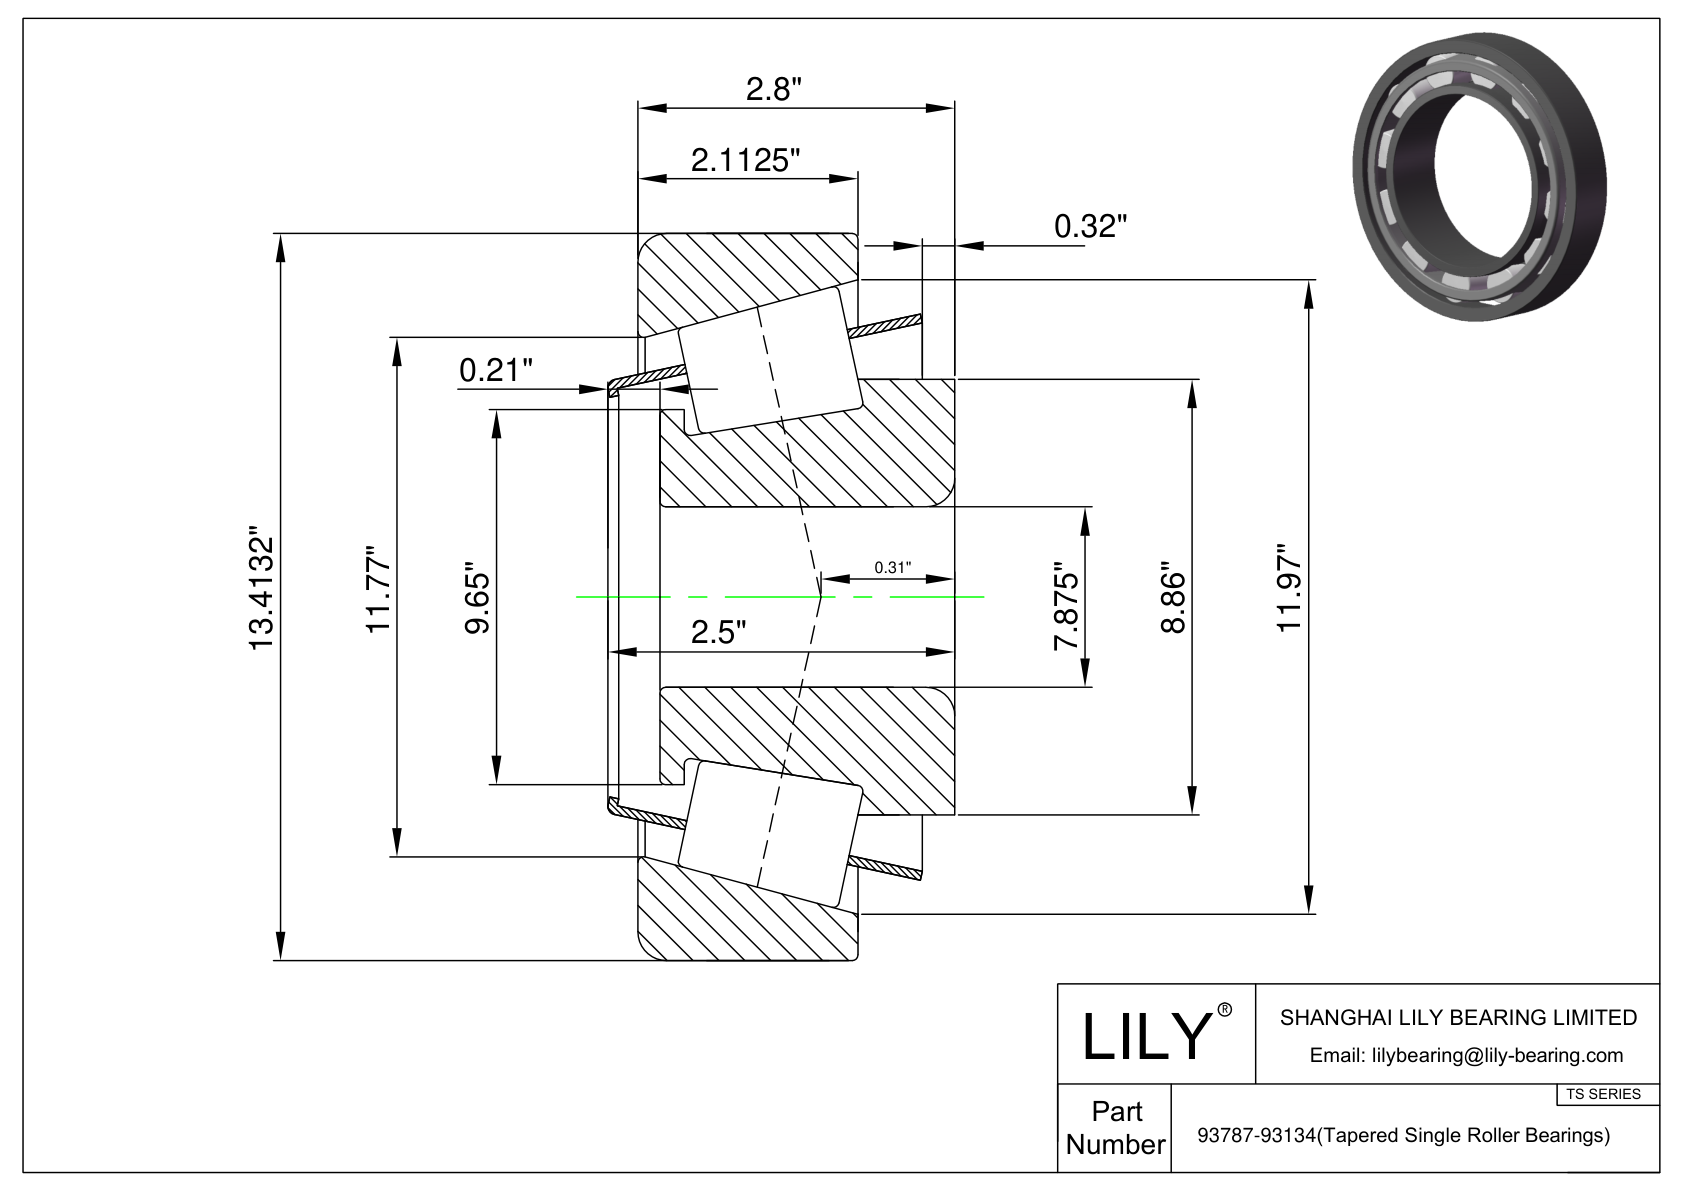 93787-93134 TS (Tapered Single Roller Bearings) (Imperial) cad drawing